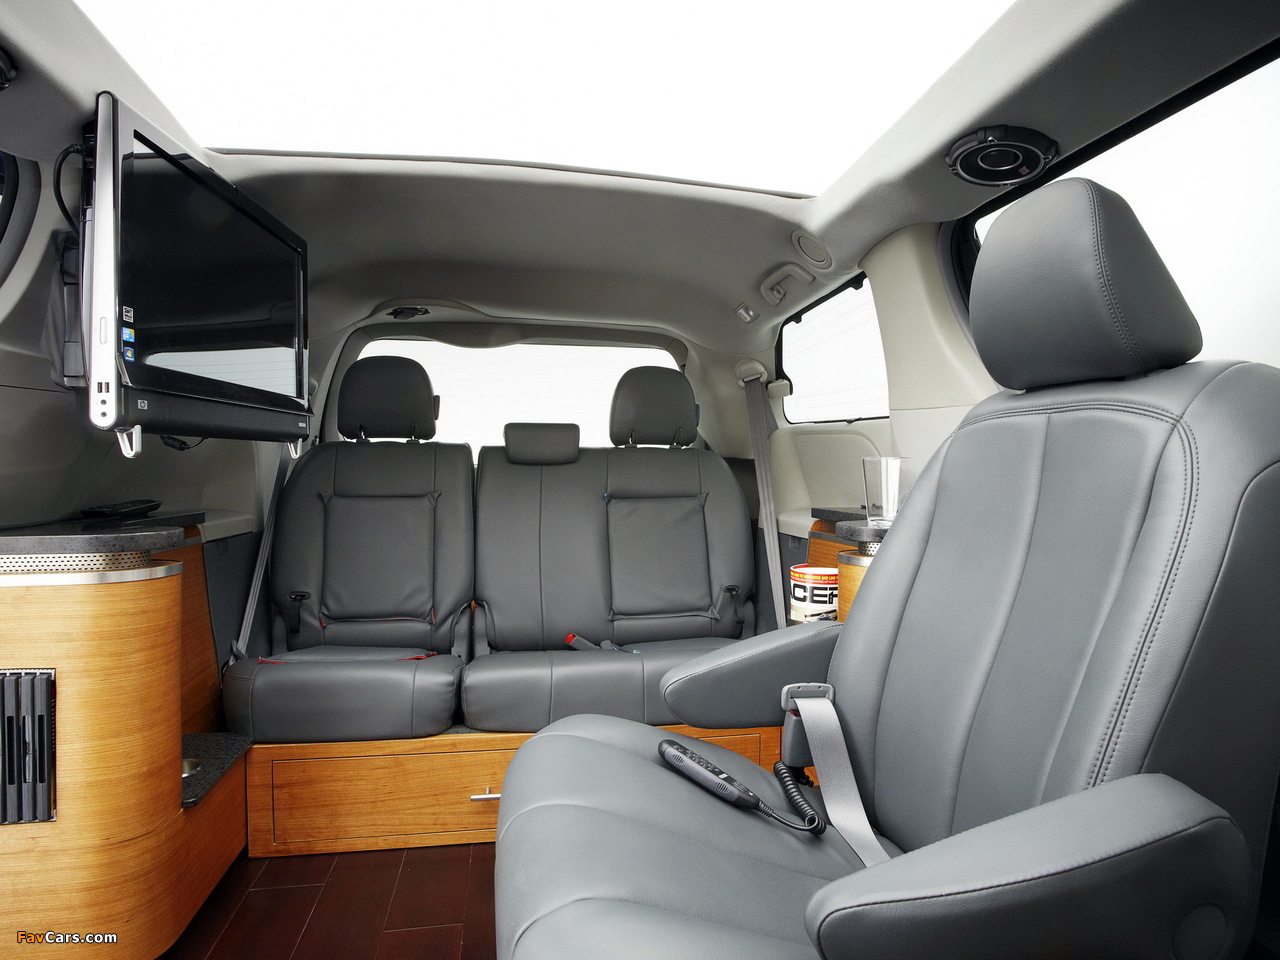 Toyota Sienna Swagger Wagon Supreme Concept 2010 pictures (1280 x 960)